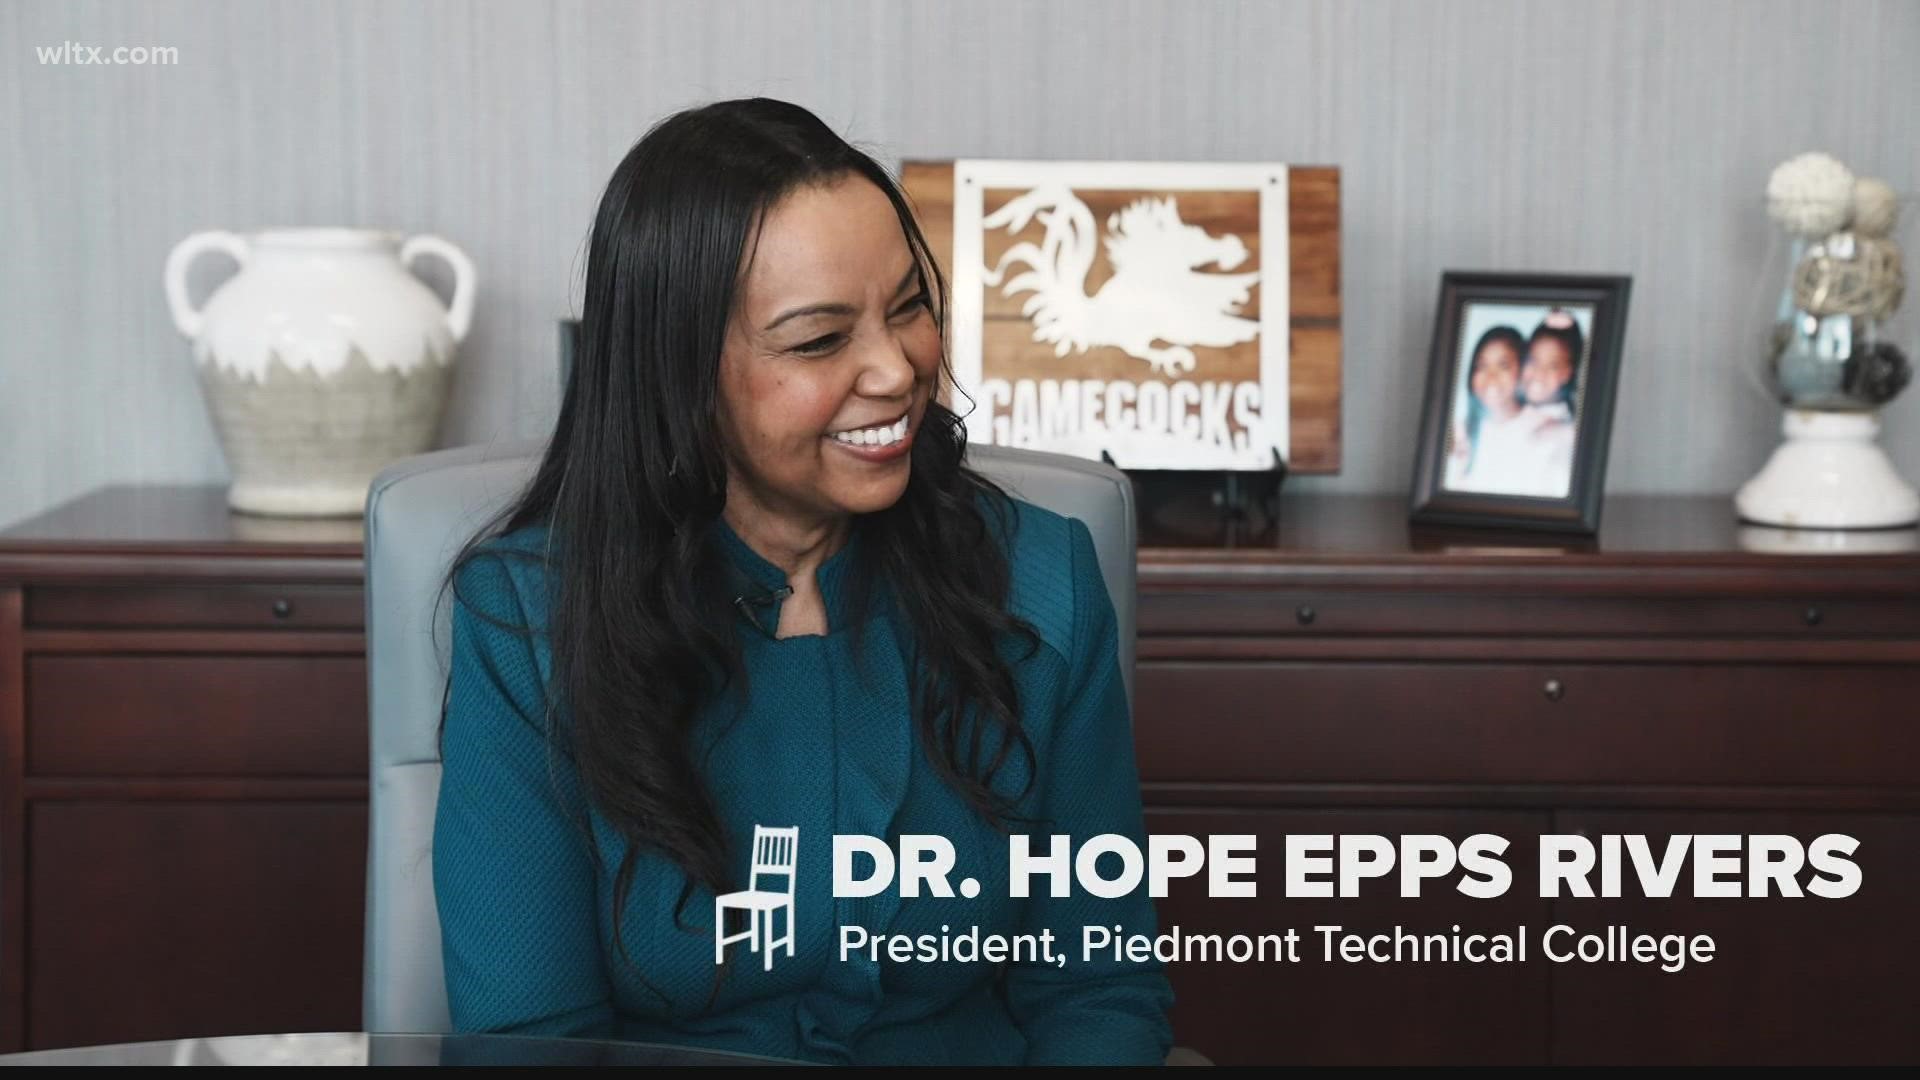 Piedmont Technical College president Dr. Hope Rivers can't imagine working anywhere other than in the community responsible for who she is today.